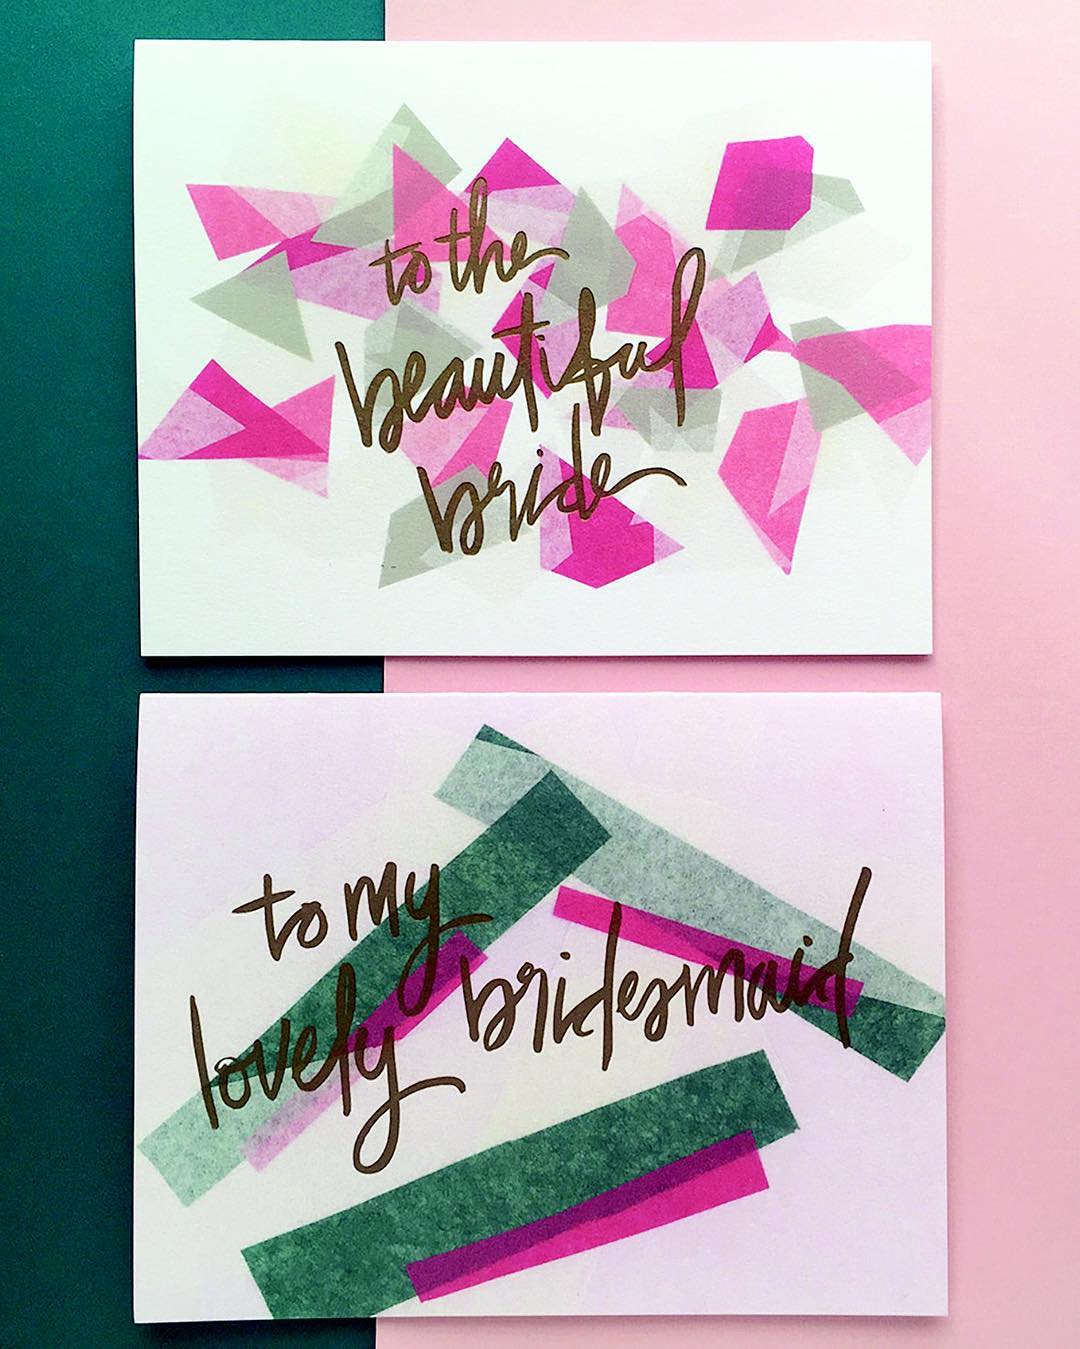 How do you ask your bestie to be a bridesmaid? @augustpaperco has an idea! These confetti cards are our